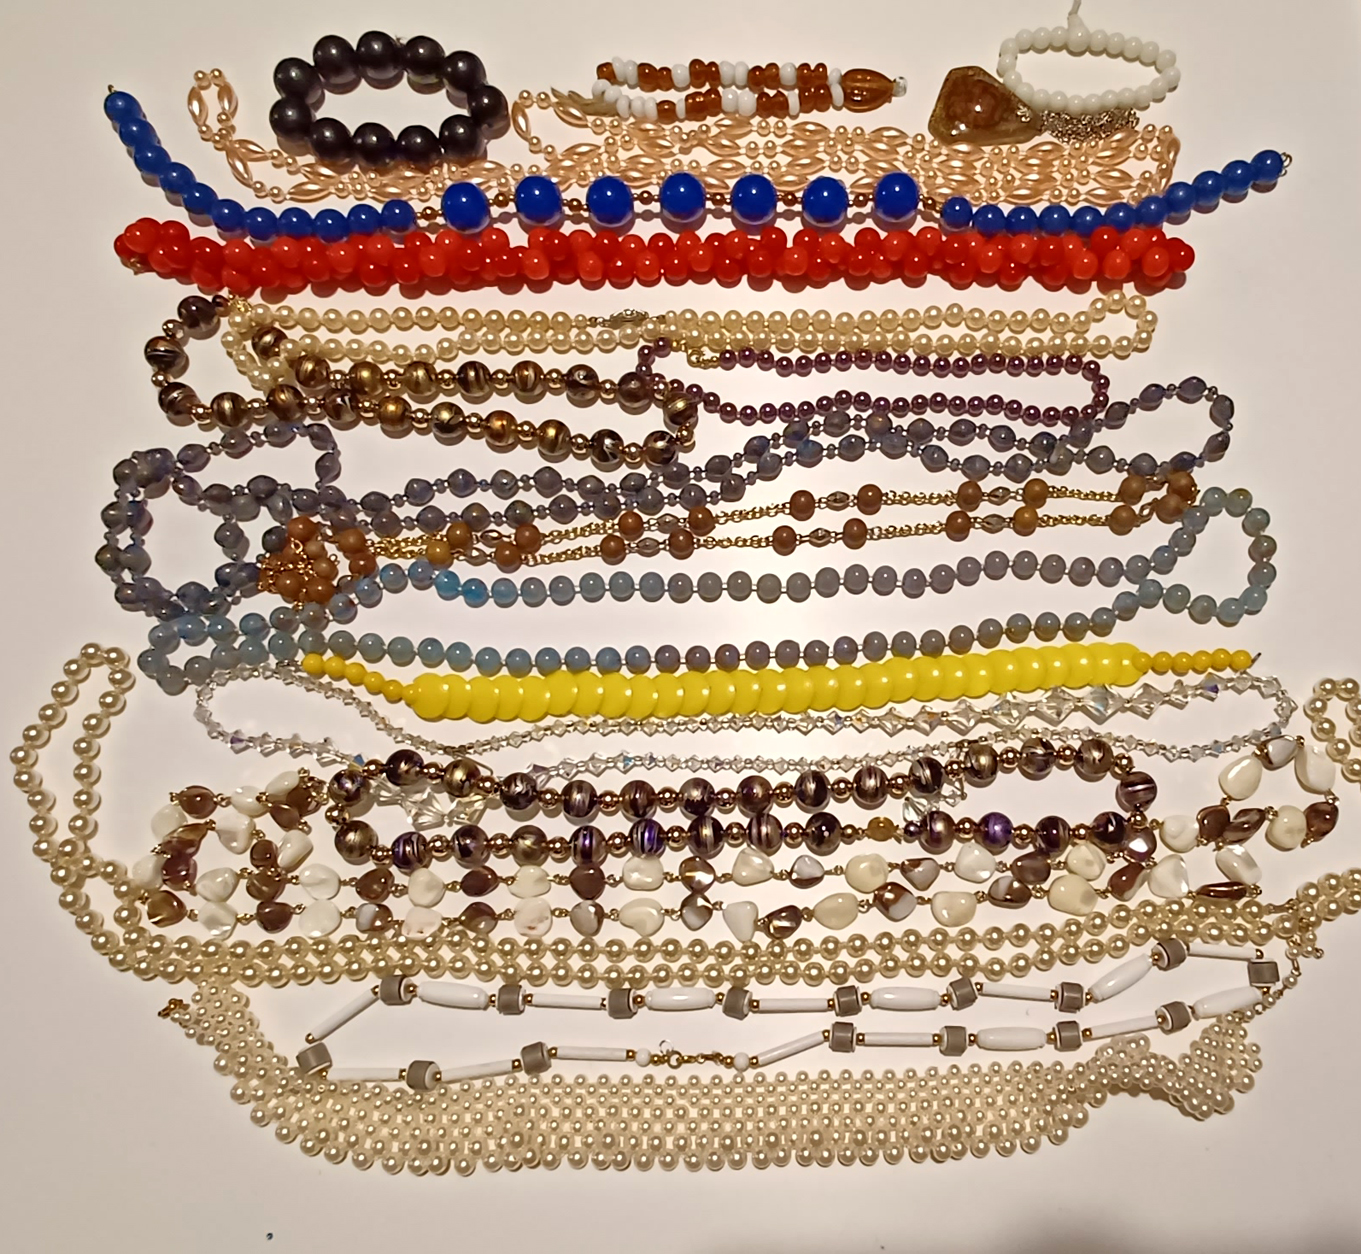 BAG OF BEADED NECKLACES AND BRACELETS